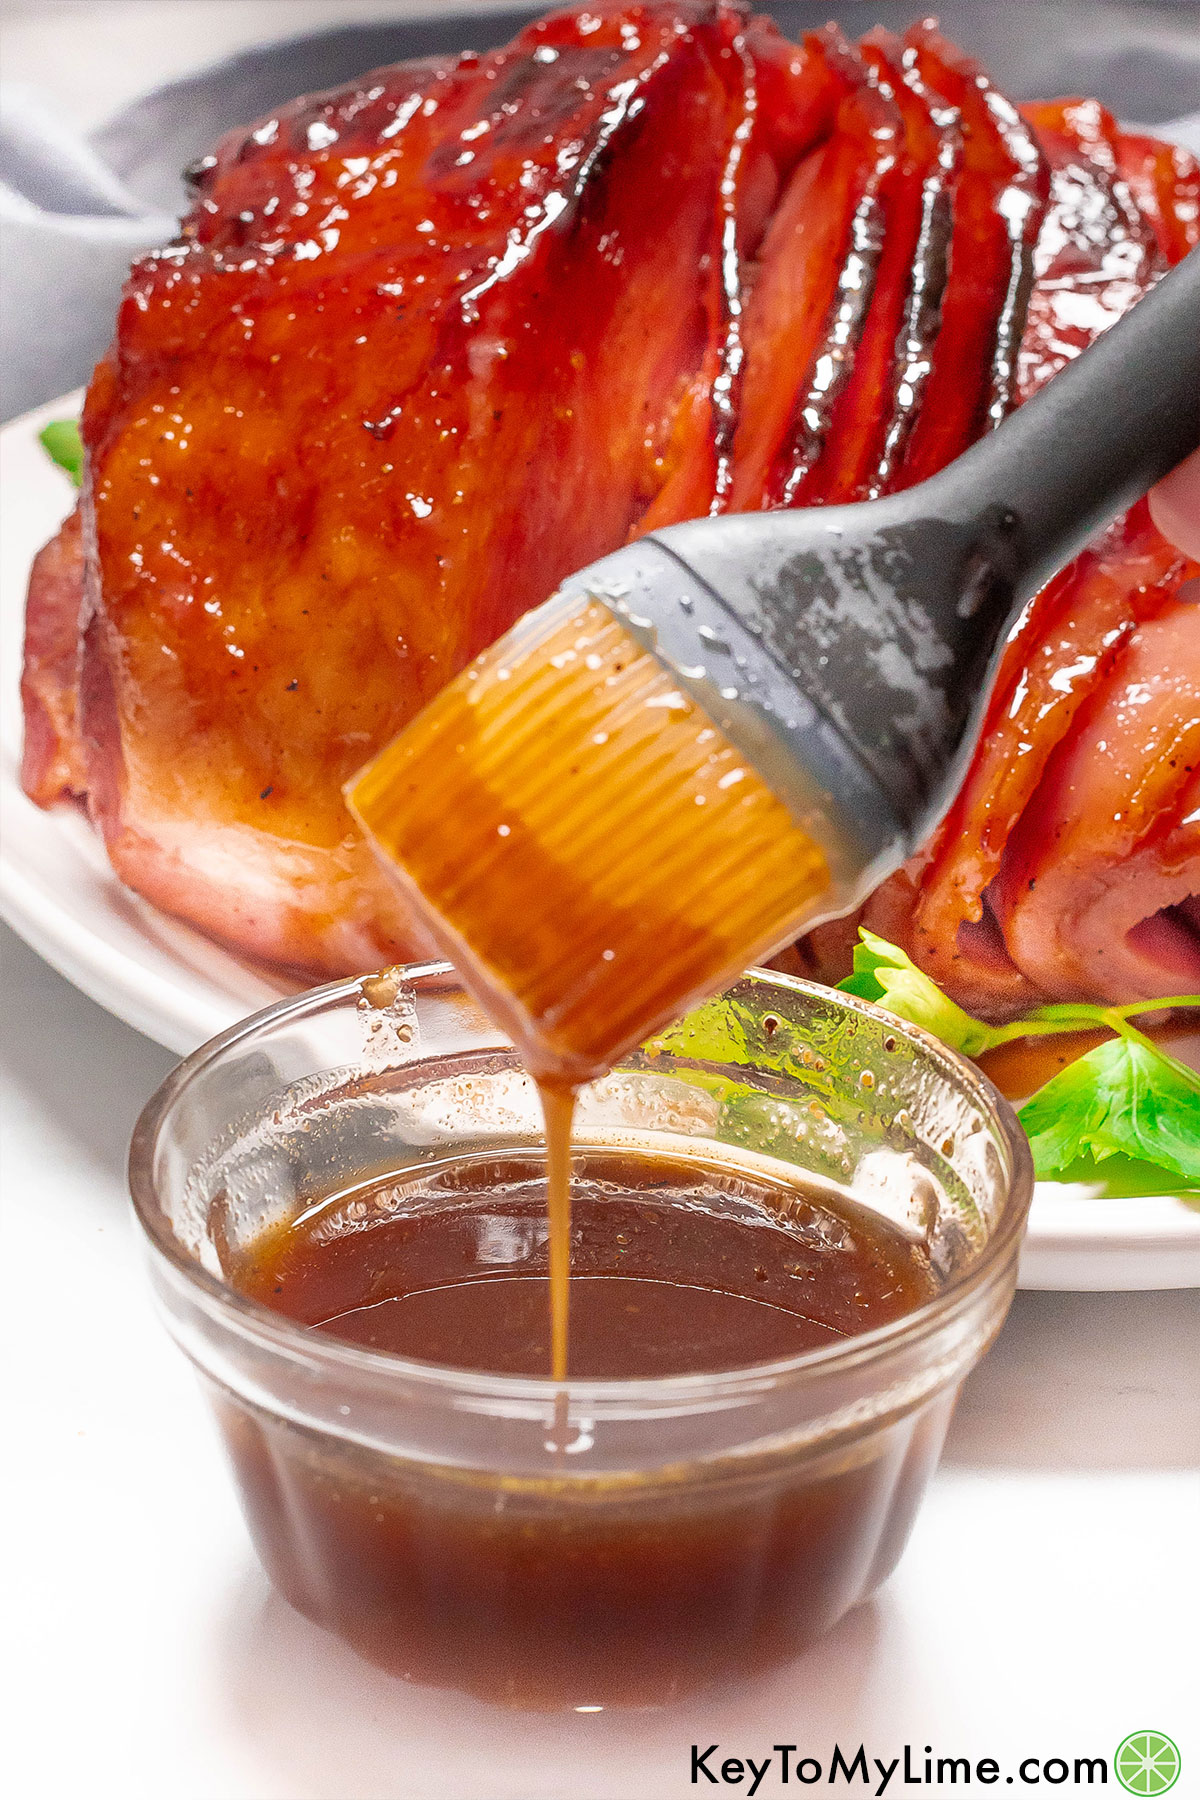 Freshly made ham glaze dripping from a basting brush with a cooked ham in the background.